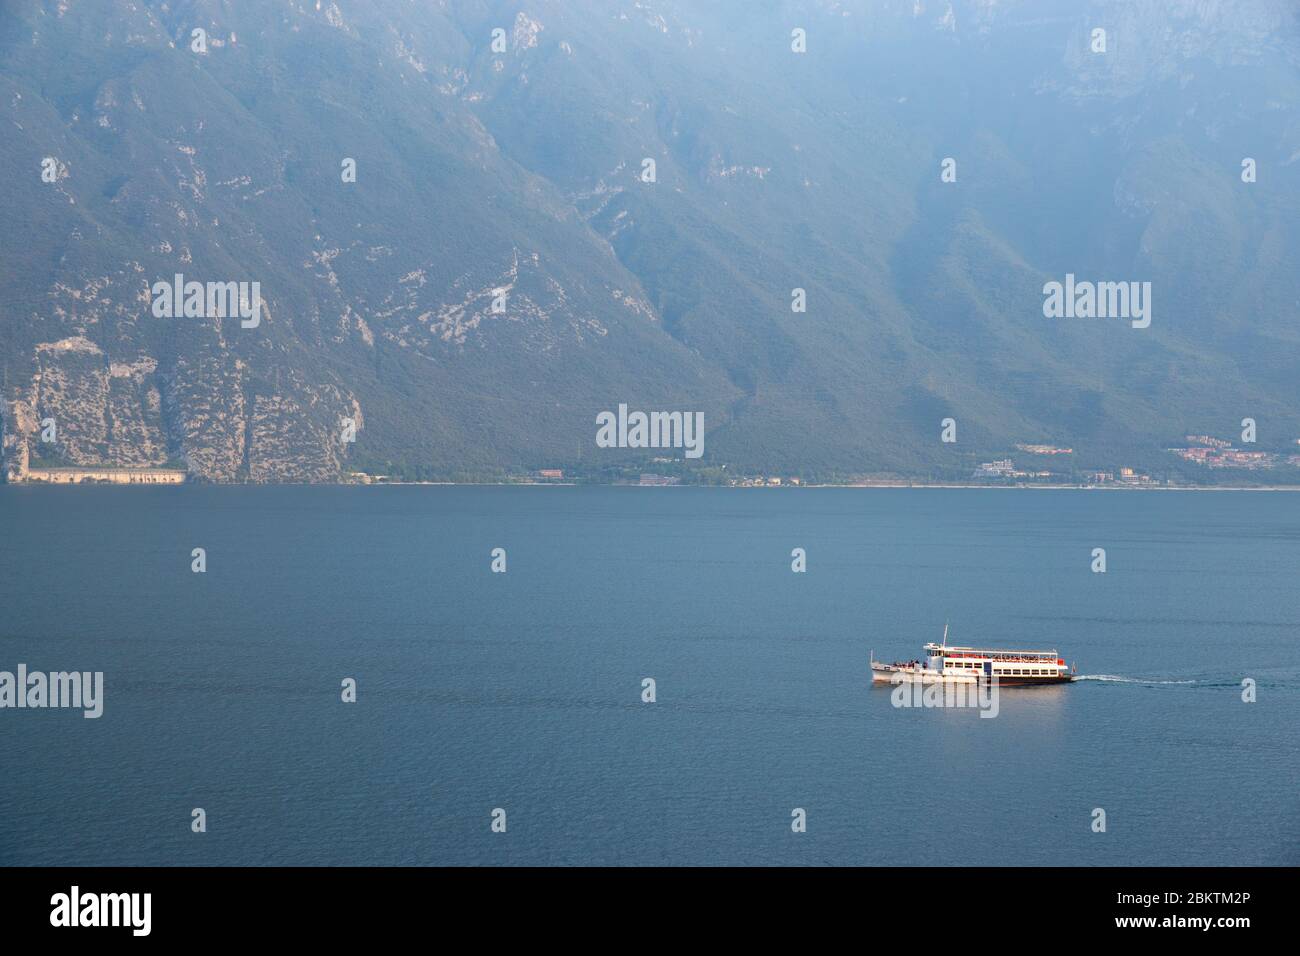 Small passenger ferry carrying tourists at lake Garda, northen italy. Silent evening September 2019. Mild water and mountains at background. Stock Photo